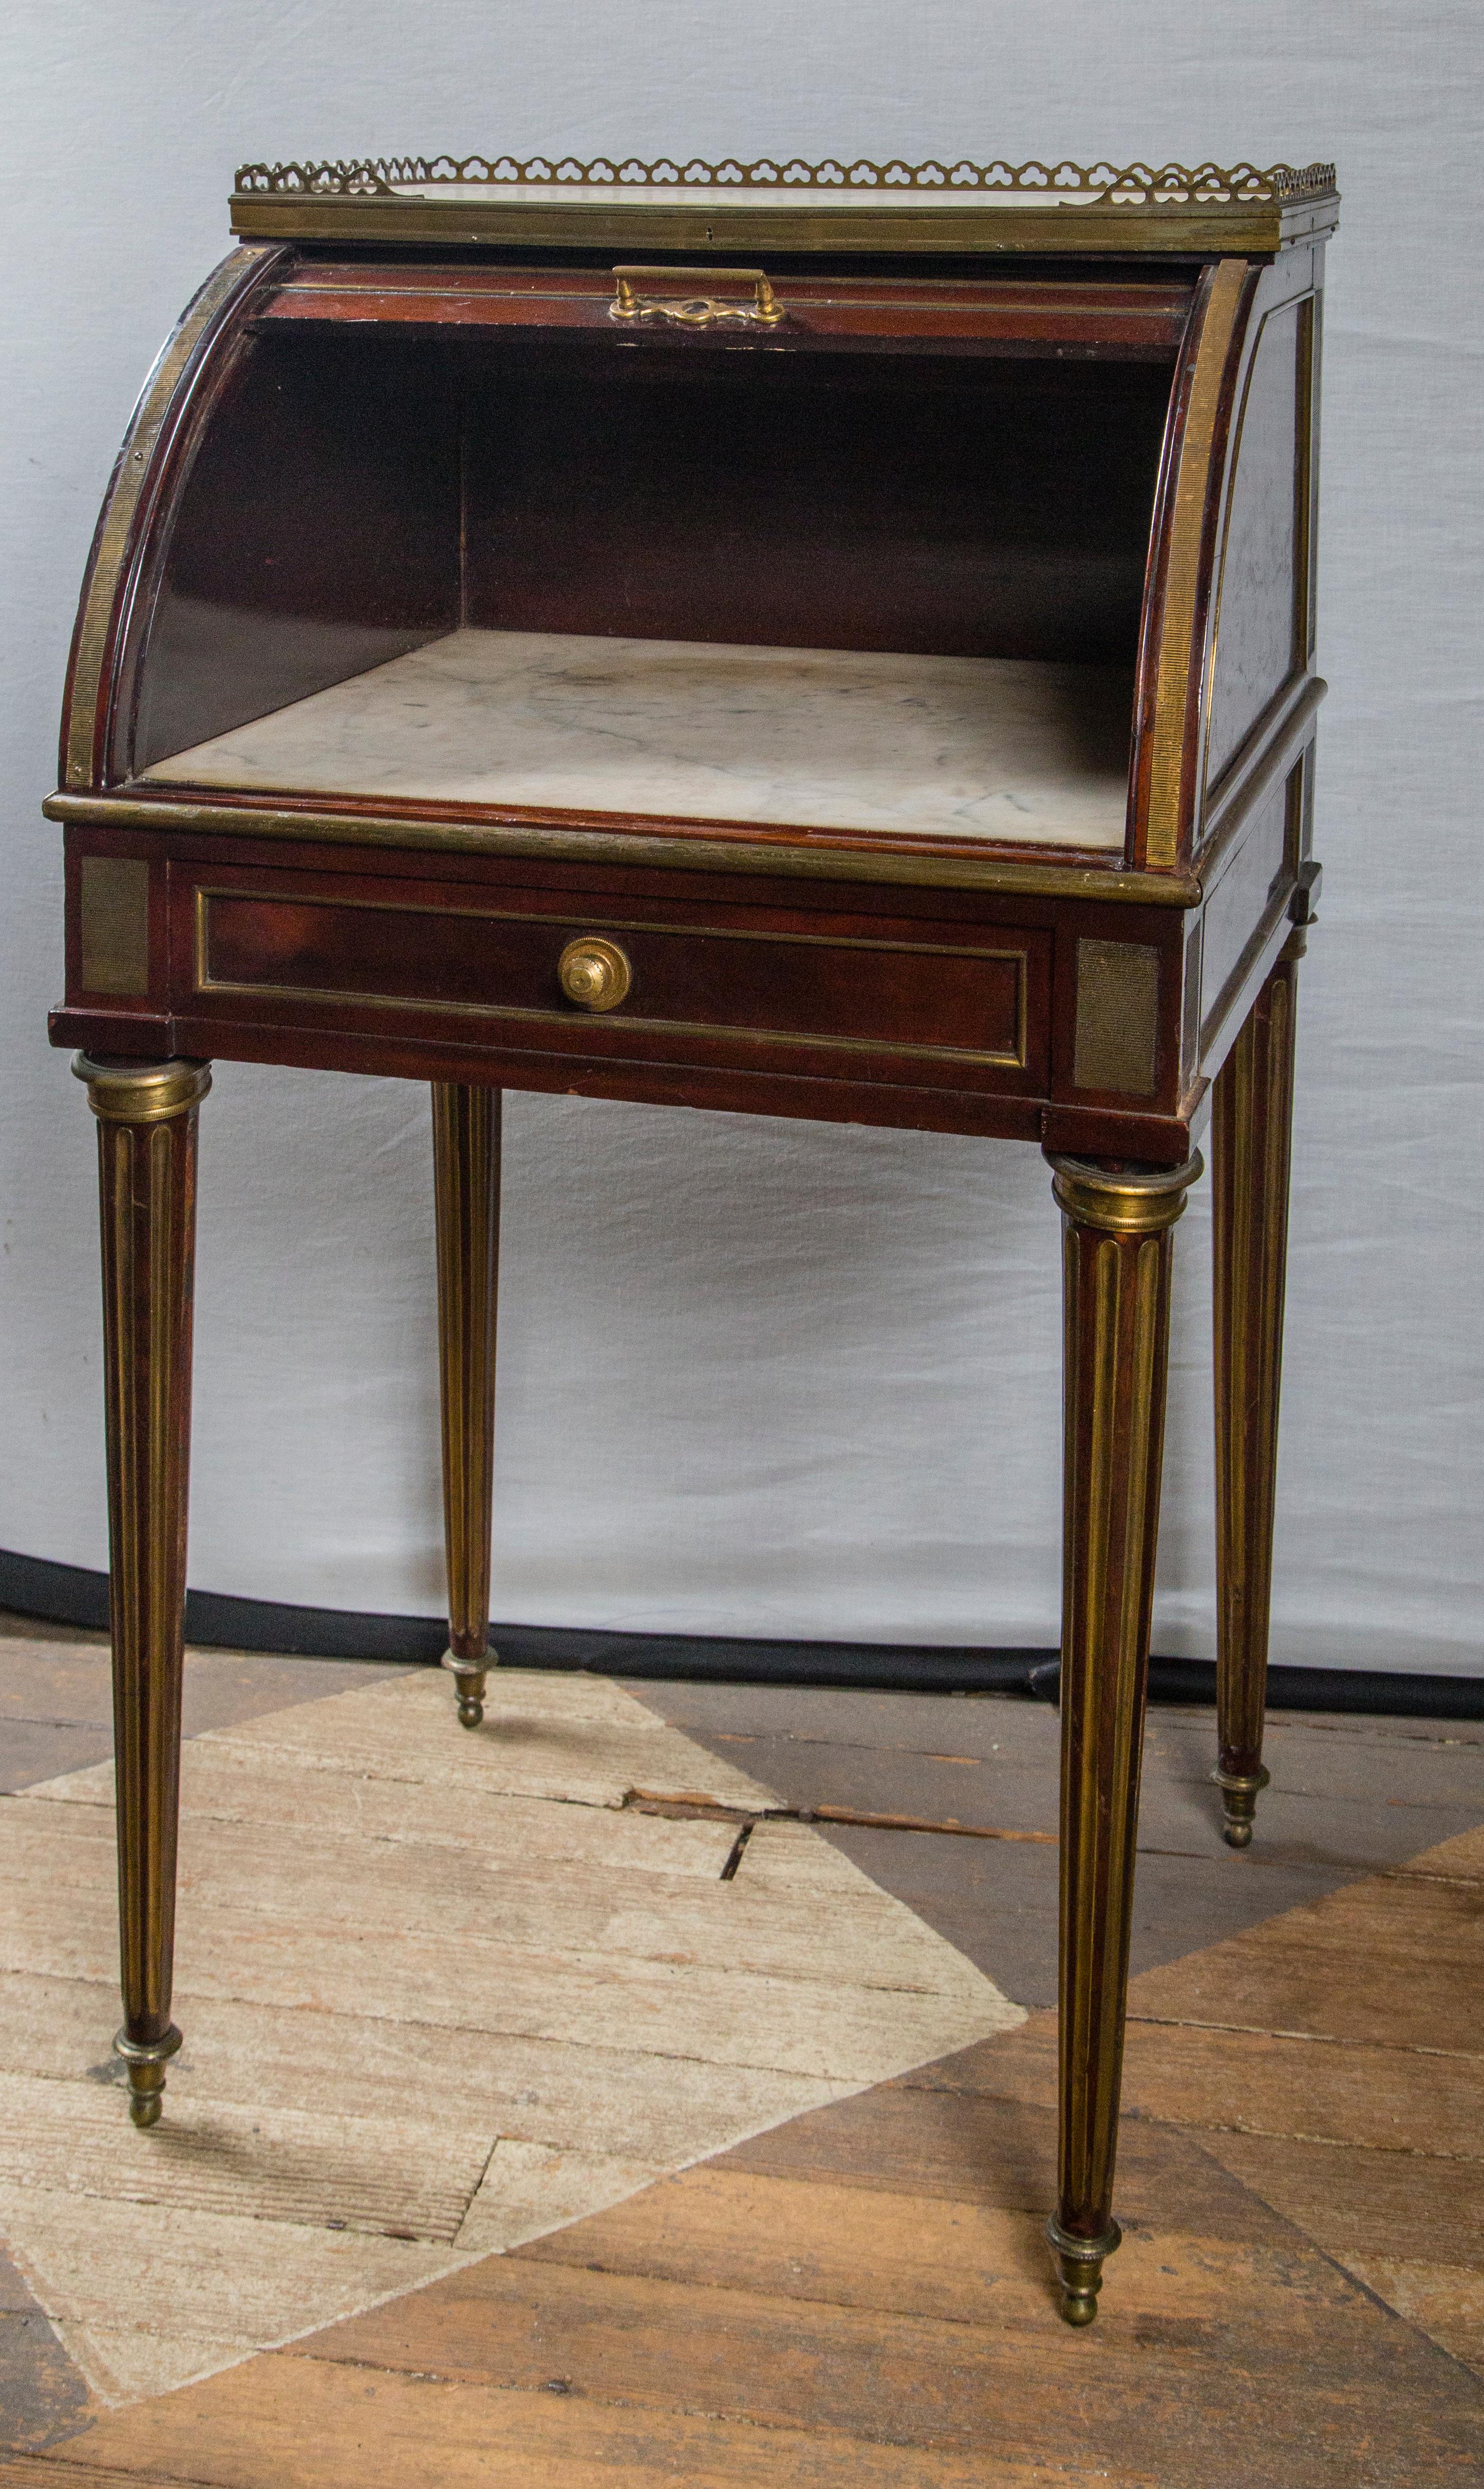 These can be sold separately. The price shown is for the pair.
Mahogany with brass mounts, even between the slats of the cylinder.
Round tapered legs with brass in the fluting. Brass toupee feet
Single drawer. Inset marble top surrounded by a